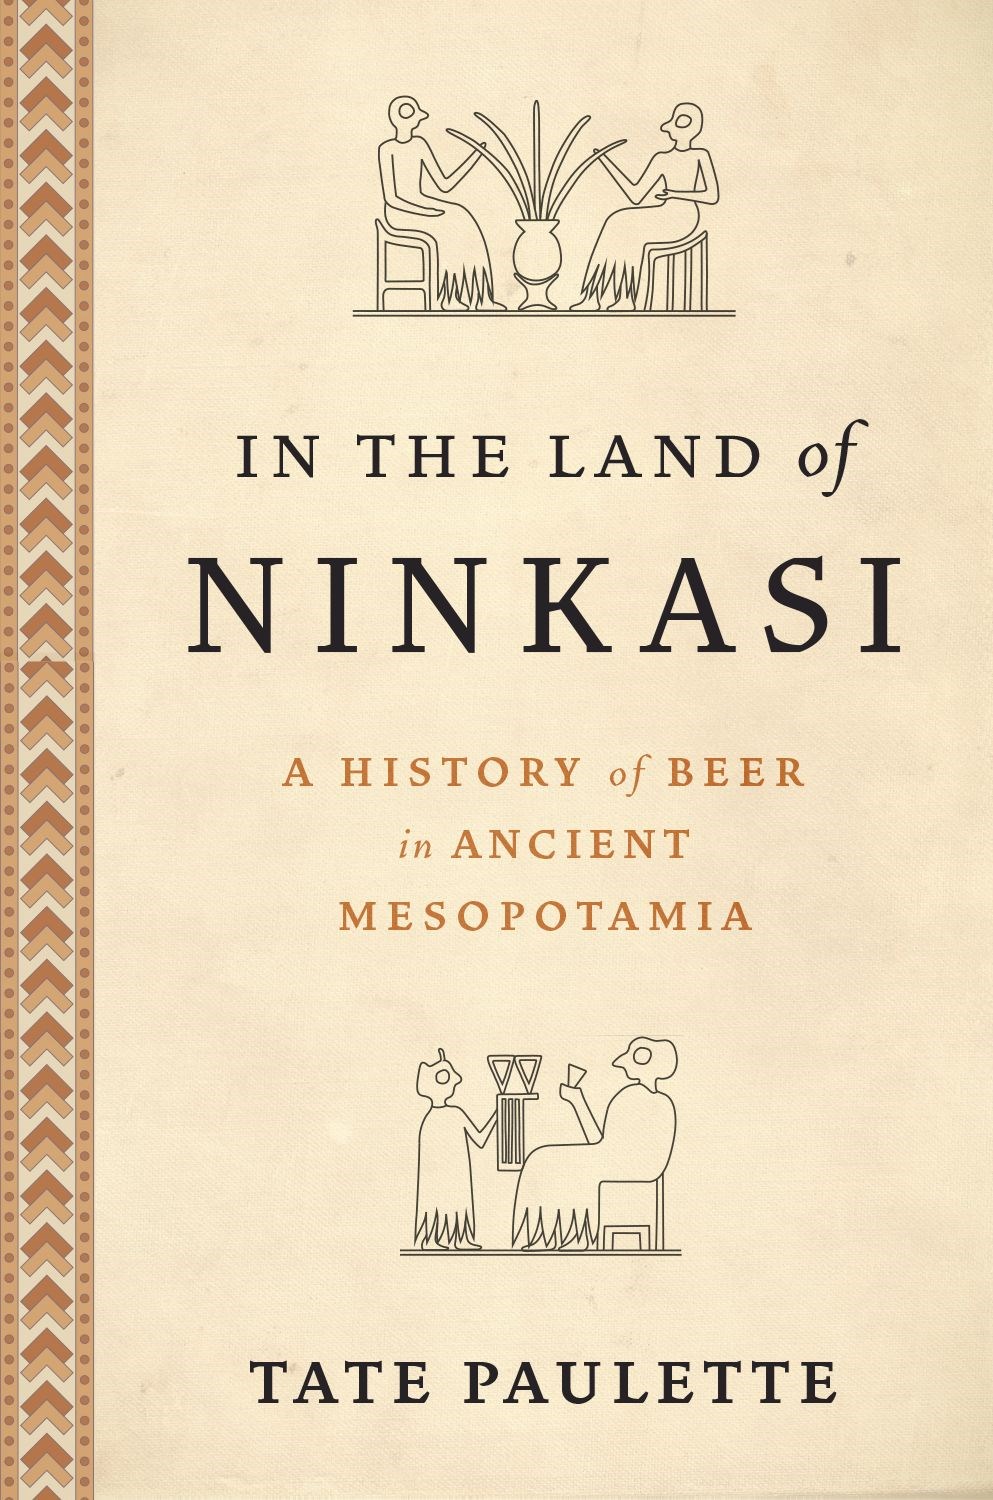 In the Land of Ninkasi: A History of Beer in Ancient Mesopotamia